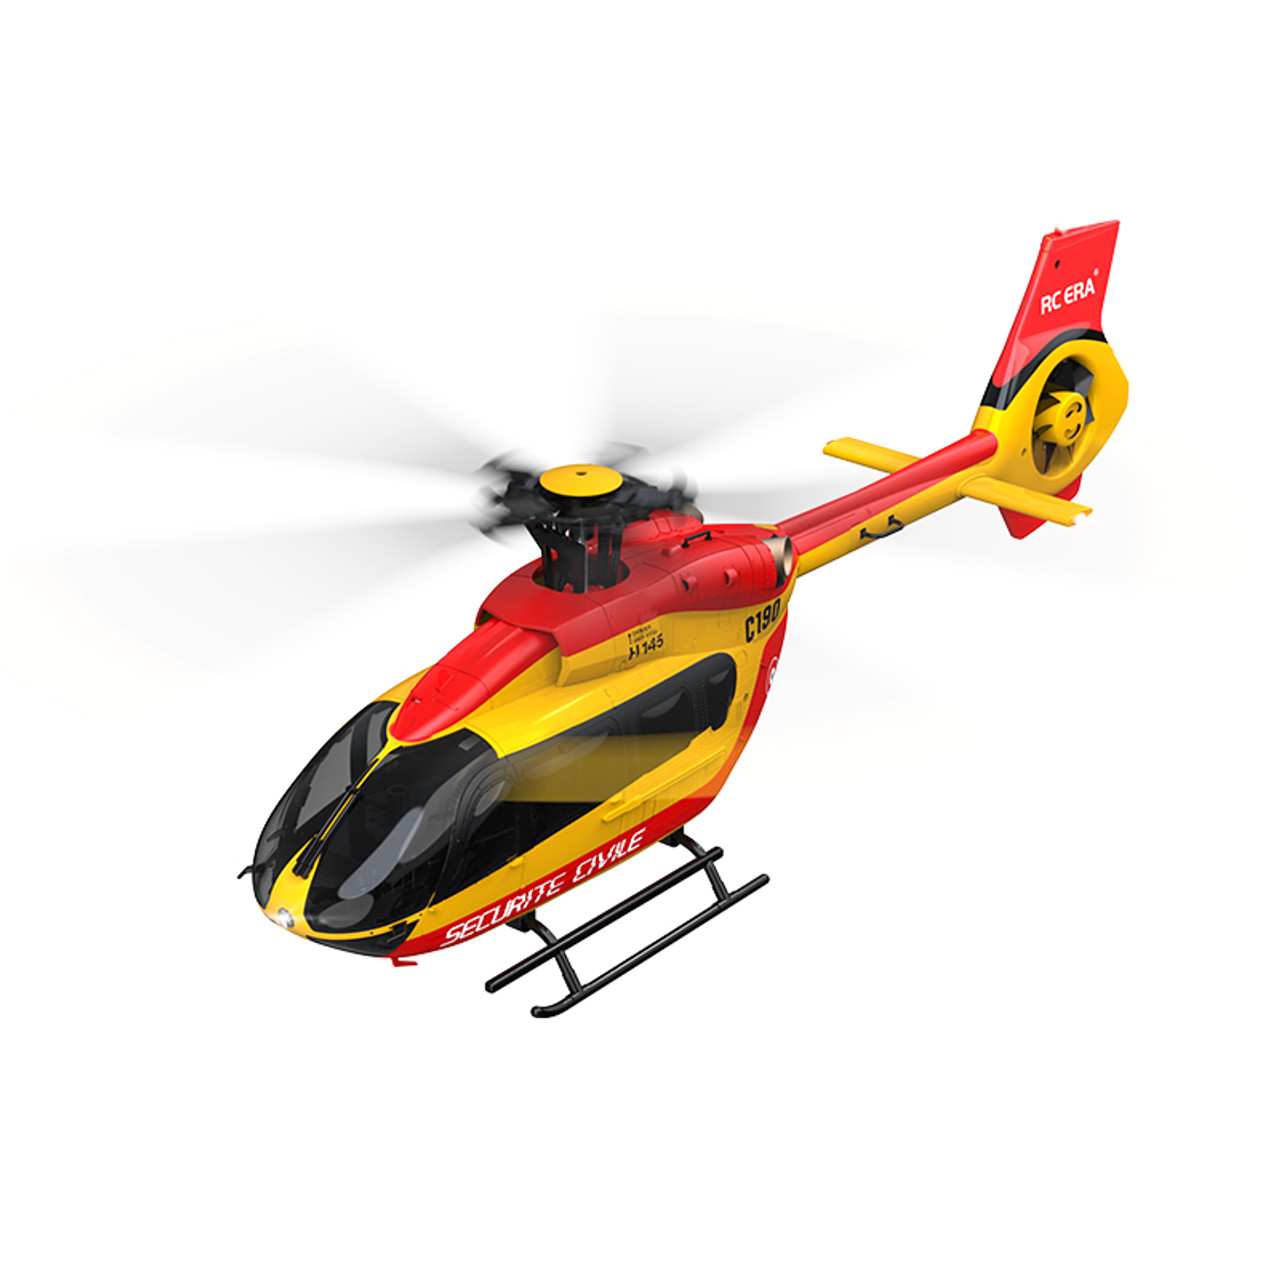 RC ERA C190 1:30 H145 Scale 2.4G 6CH 6-Axis Gyro Optical Flow Localization  Altitude Hold Flybarless RC Helicopter RTF